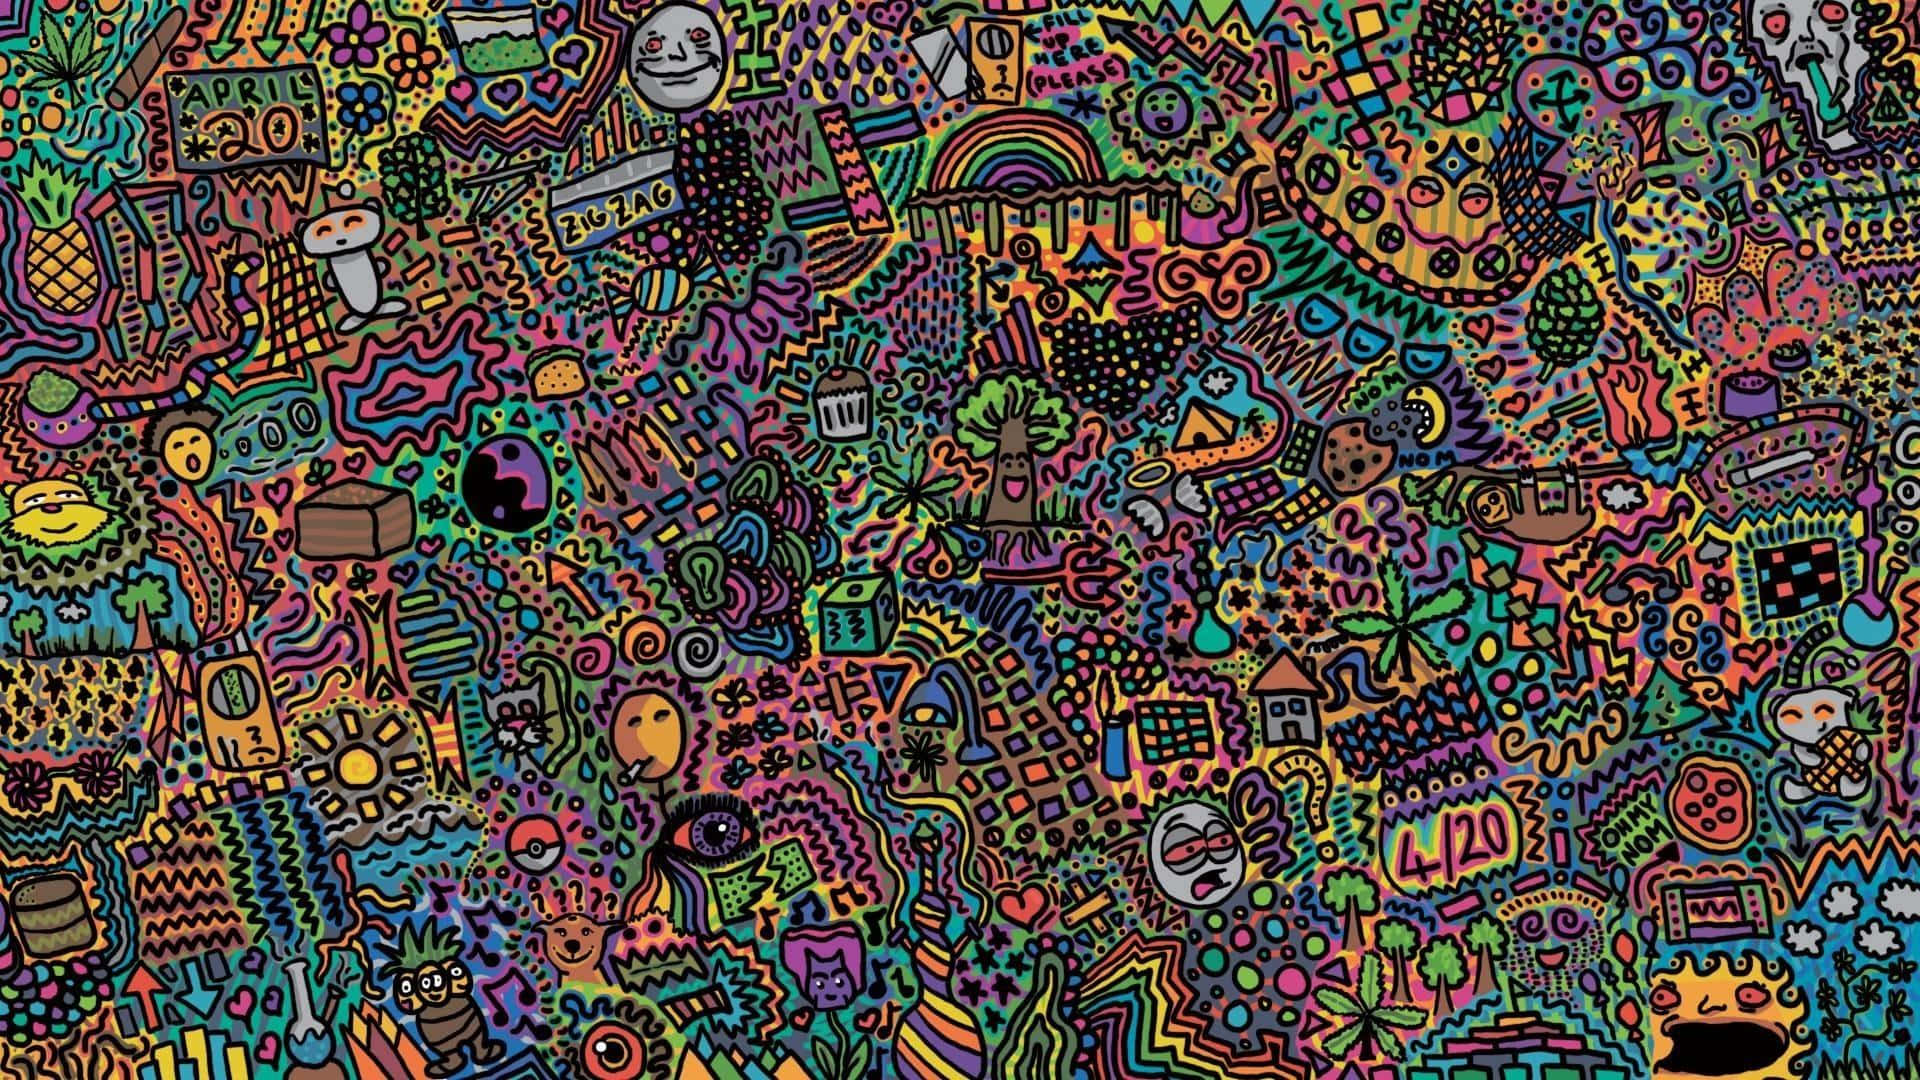 trippy moving backgrounds for tumblr